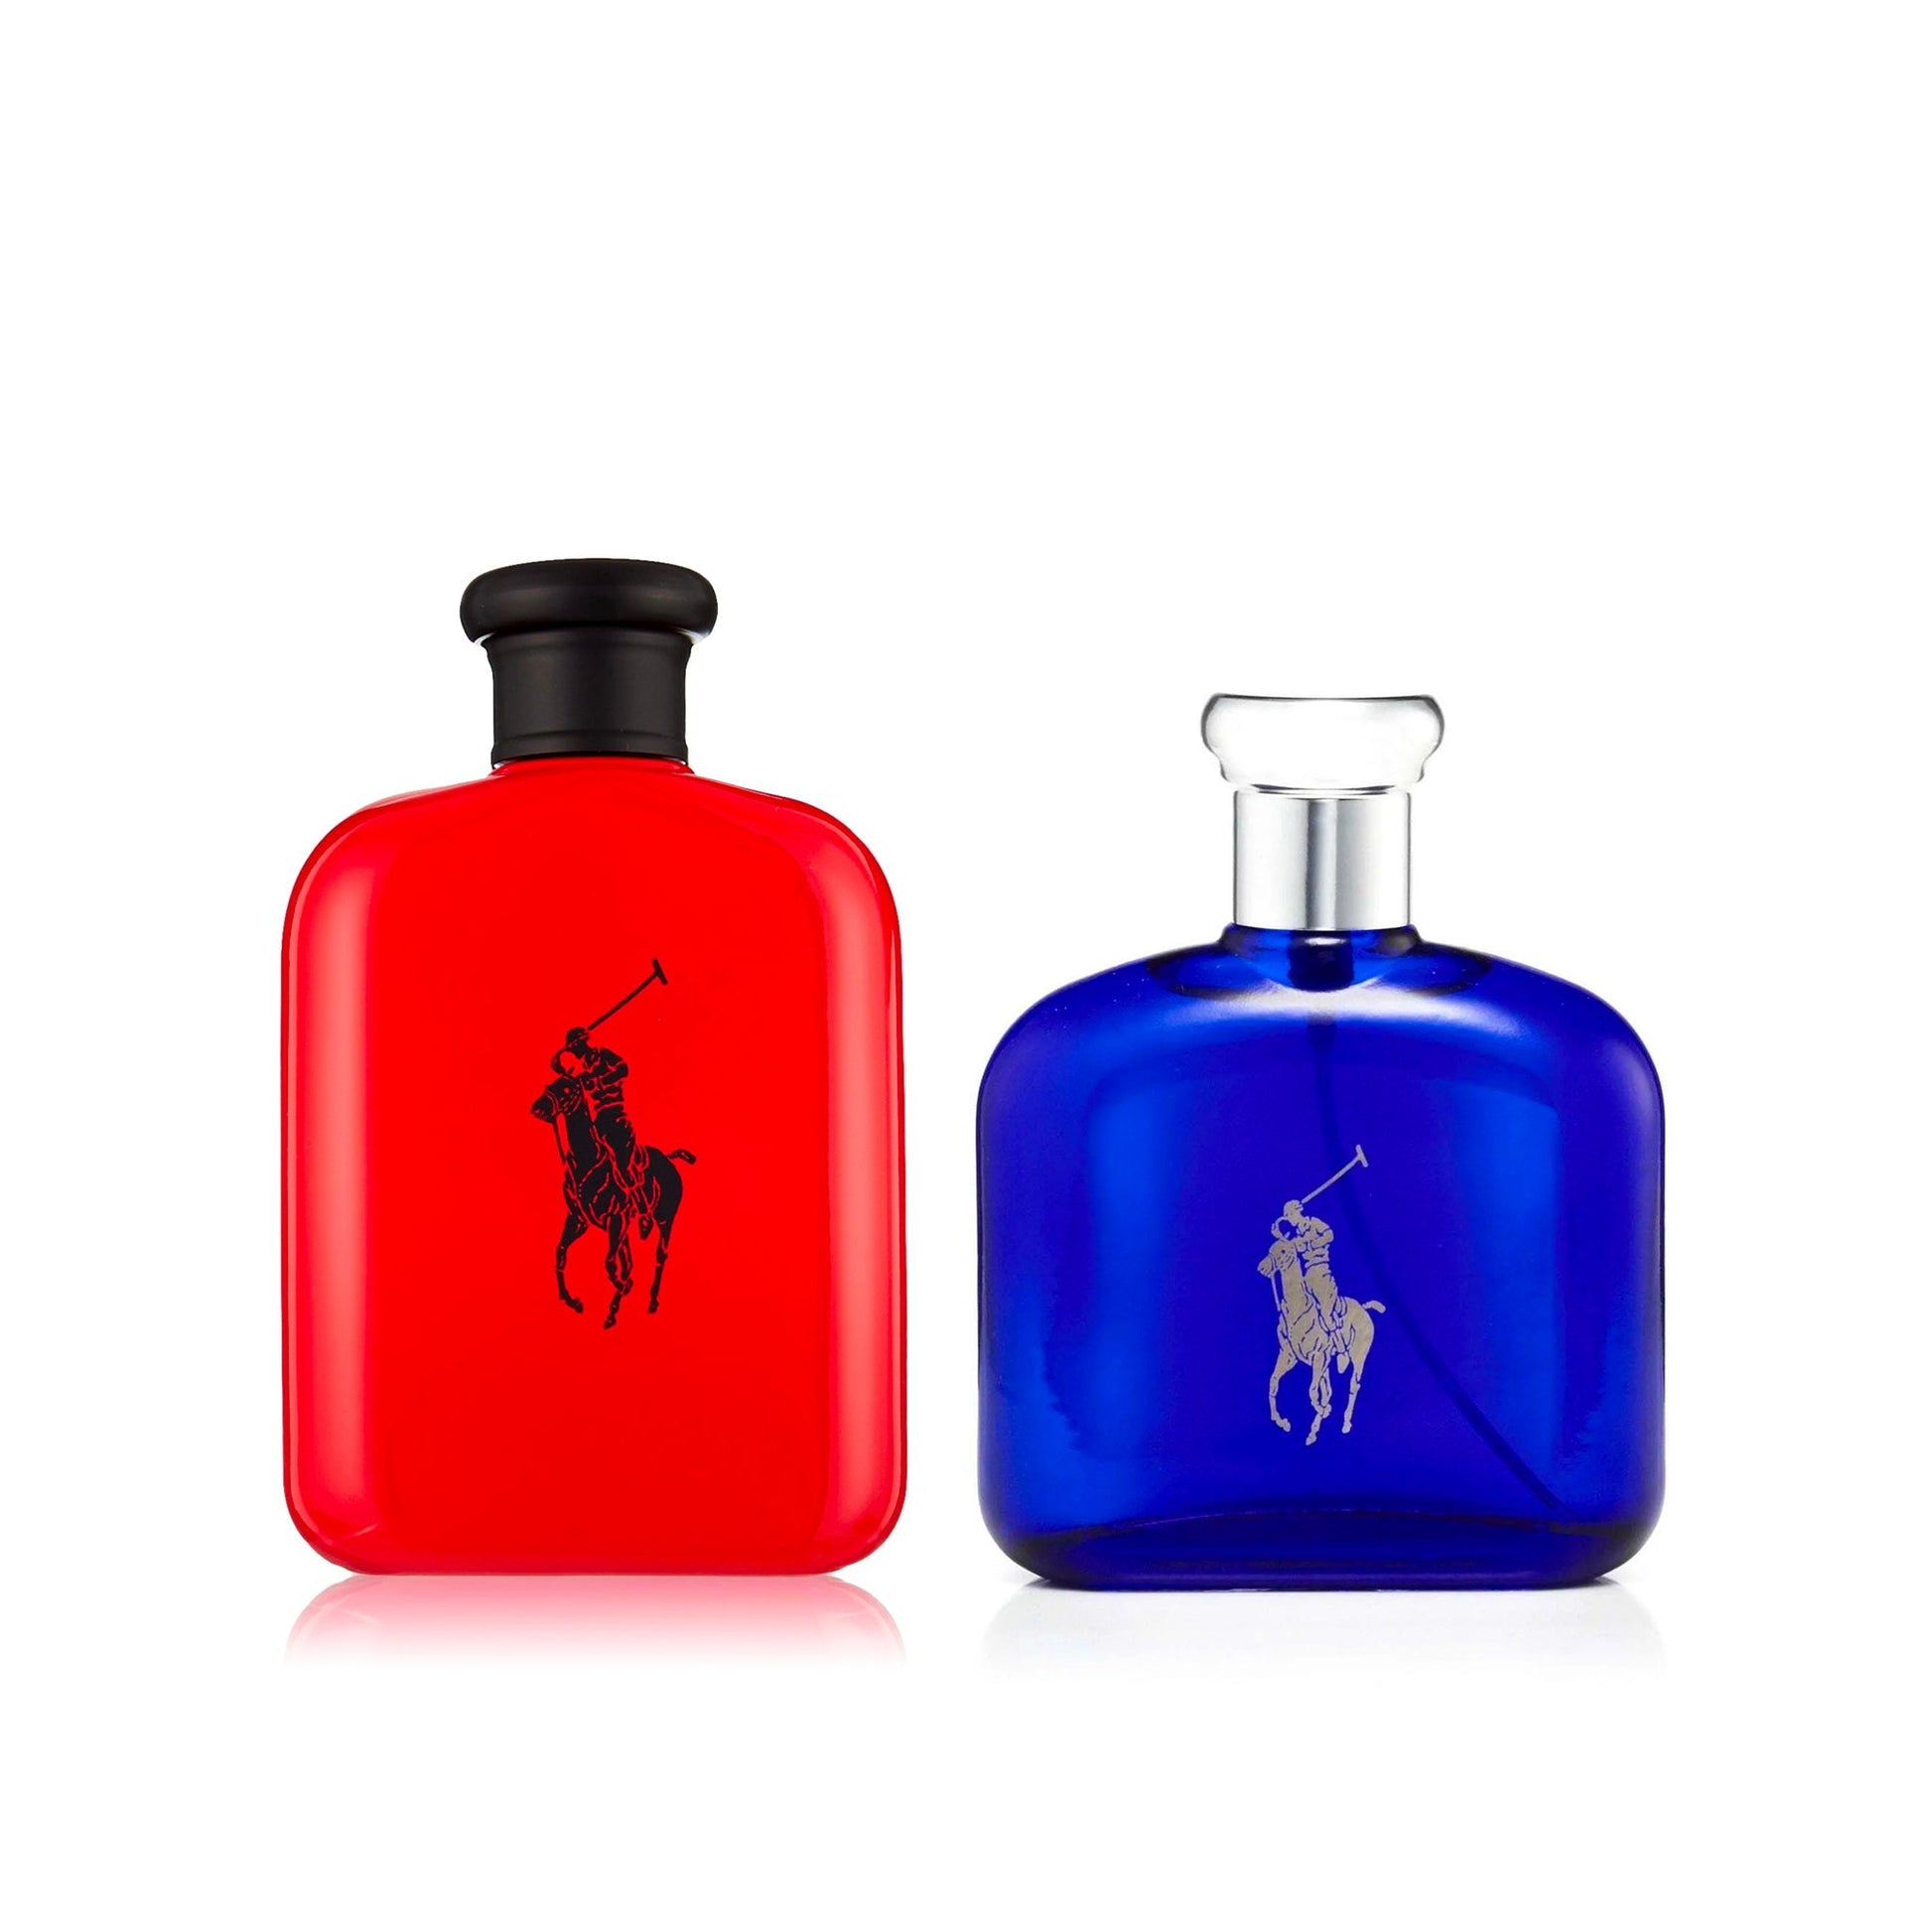 Bundle for Men: Polo Red by Ralph Lauren and Polo Blue by Ralph Lauren, Product image 1